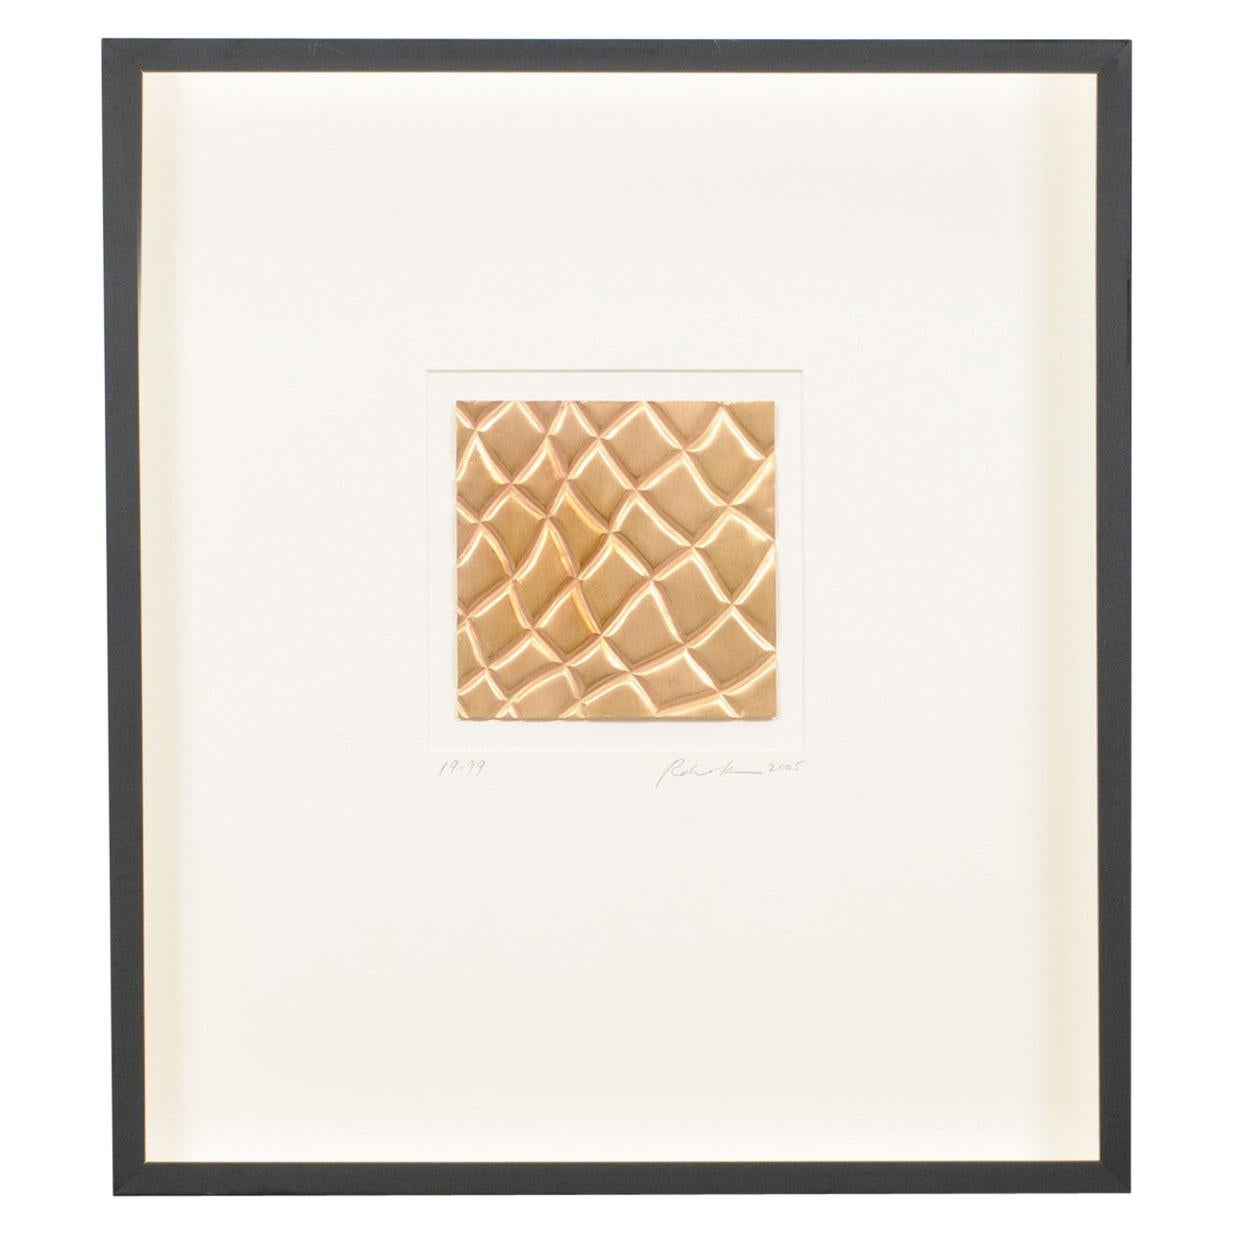 Black Framed Square Gold Textured Art - Robert Kuo For Sale